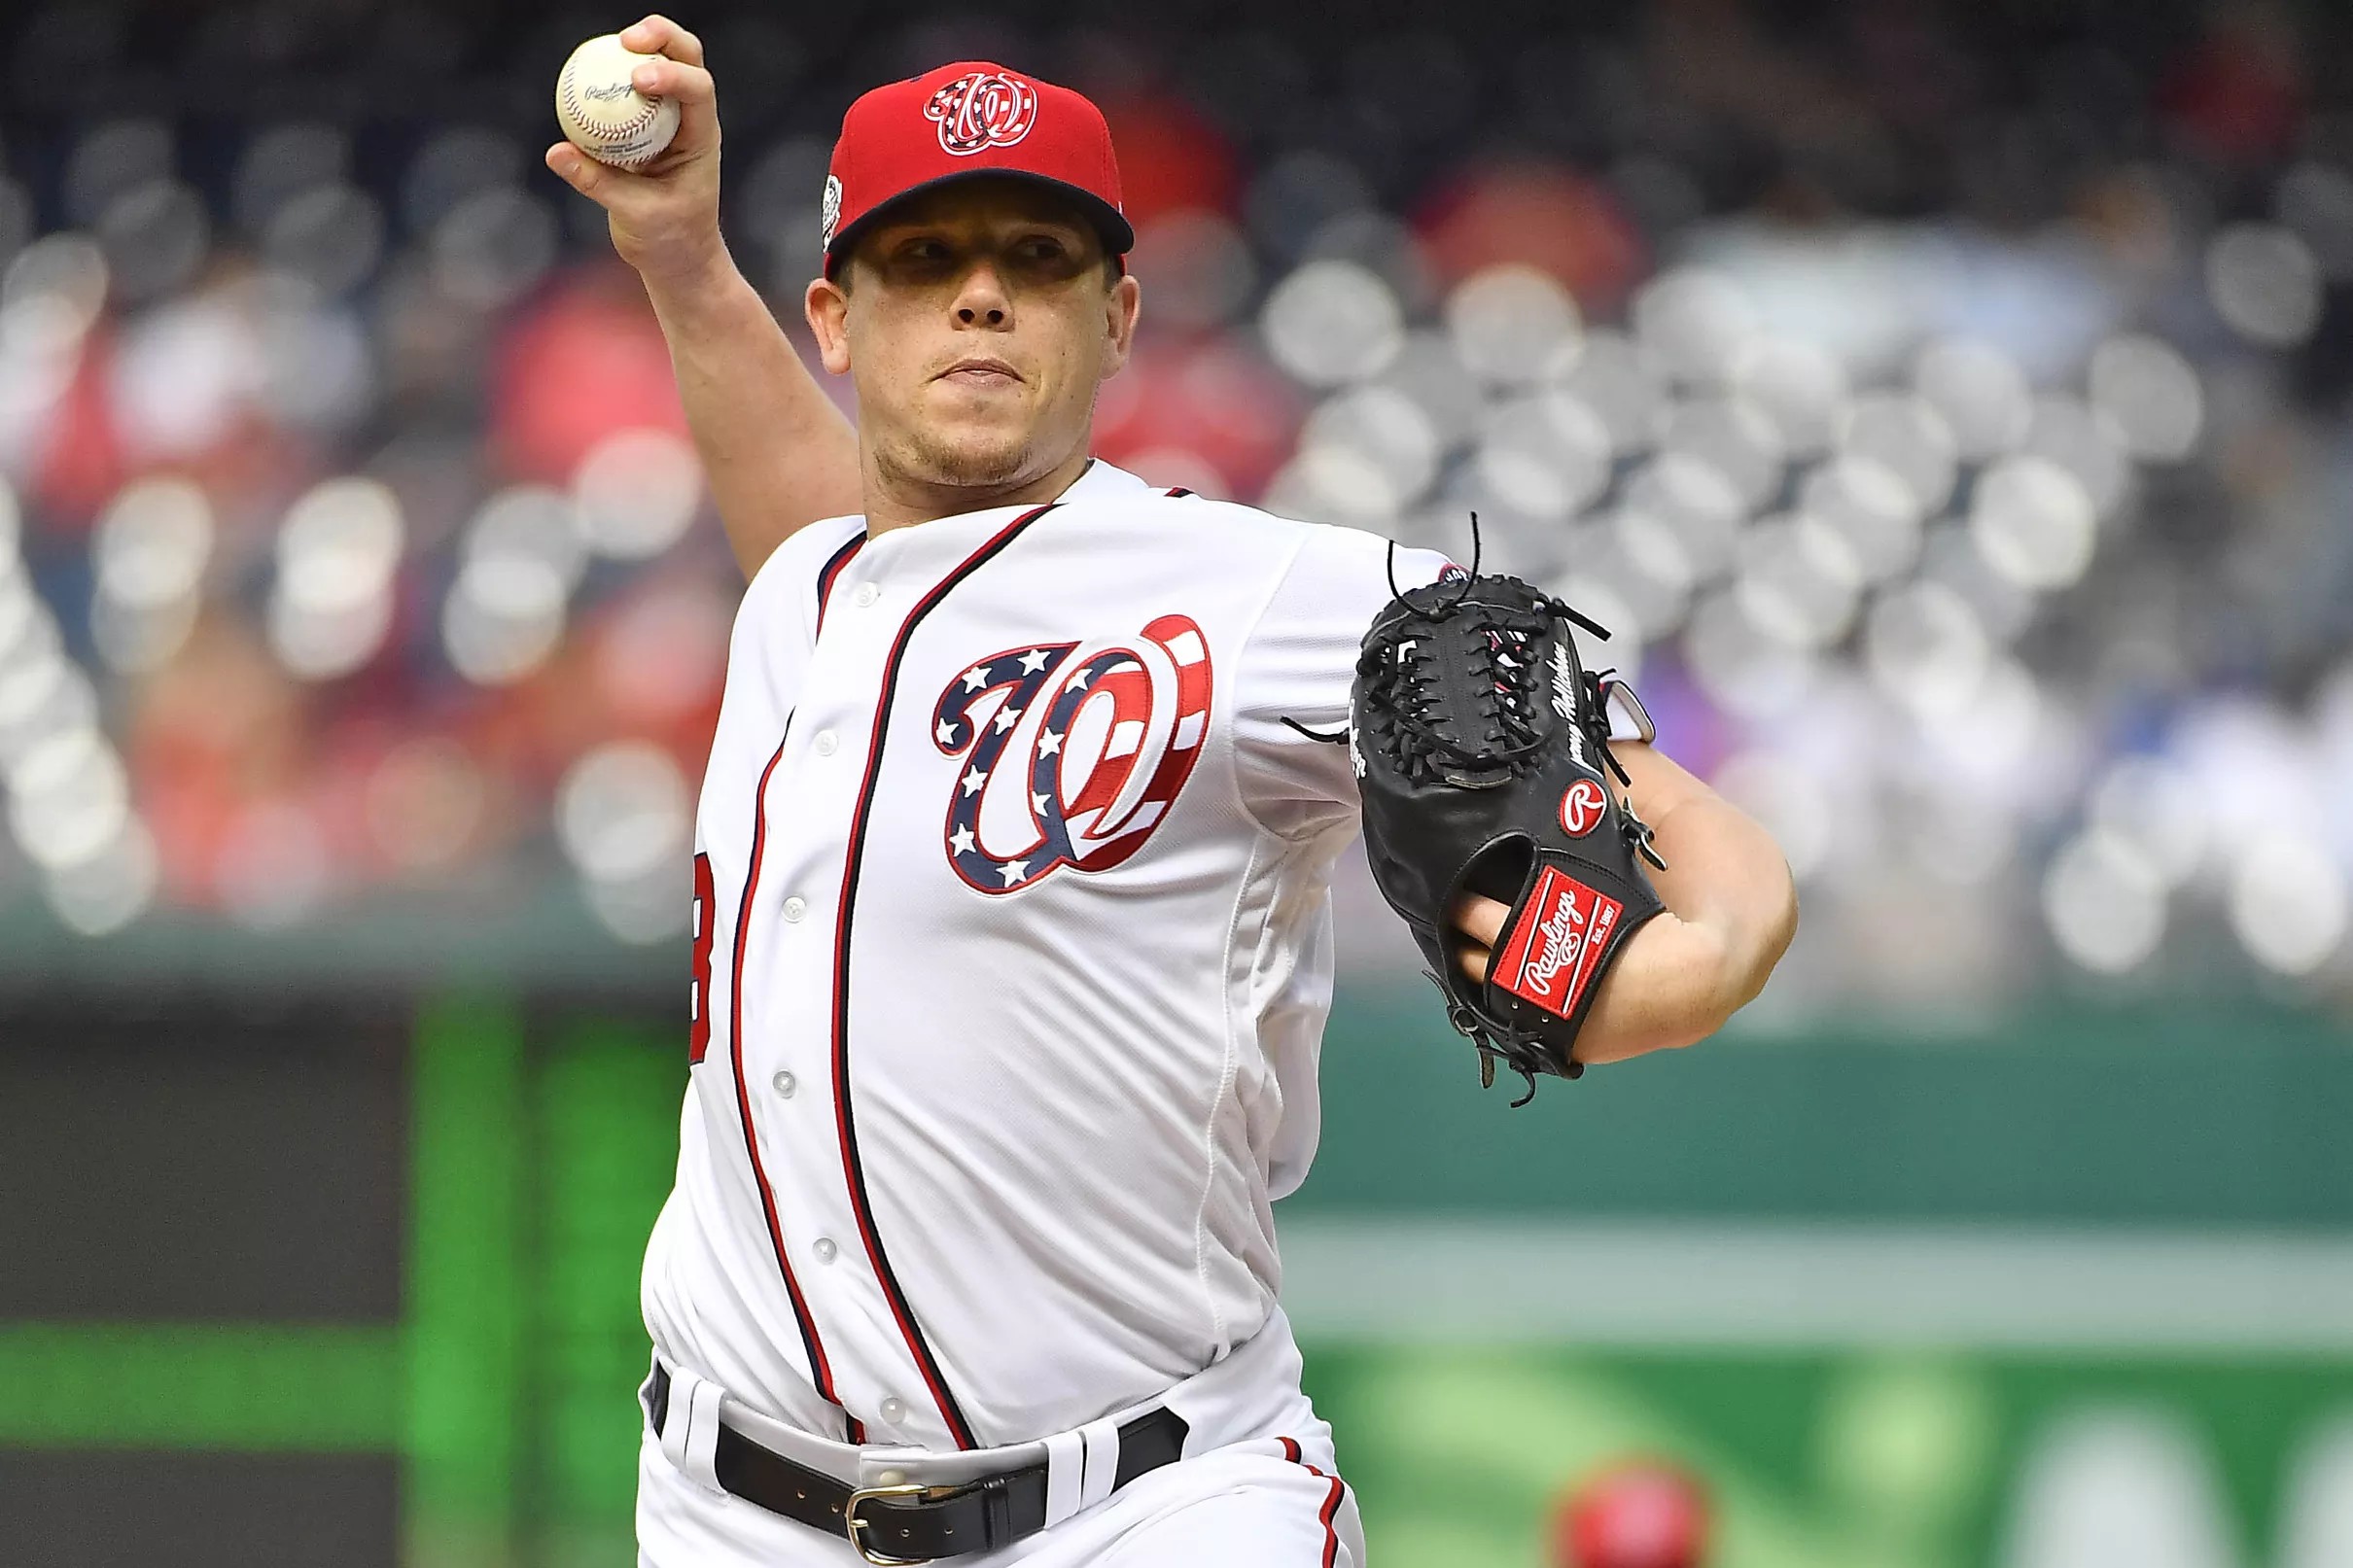 Jeremy Hellickson lifted early in Nationals’ 4-3 loss to D-backs in D.C.